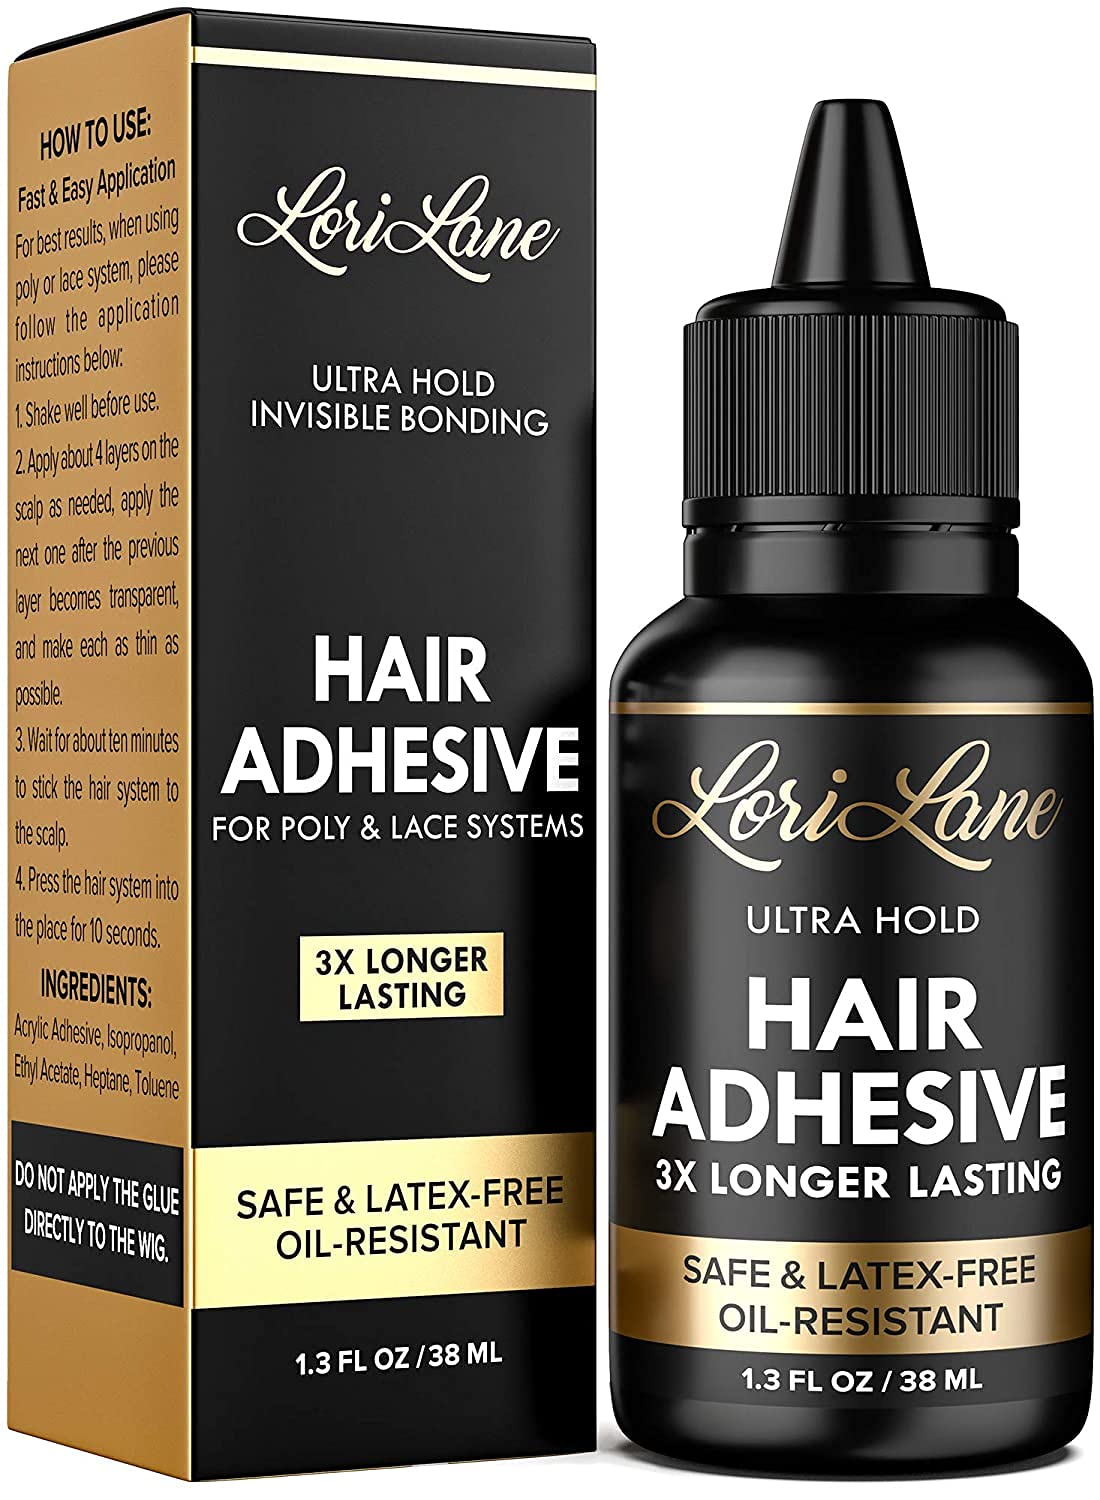 Wig Glue for Front Lace Wig - Waterproof Lace Glue - Latex-Free and  Oil-Resistant Hair Adhesive Glue - Strong Hold Bonding - 1.3 fl oz